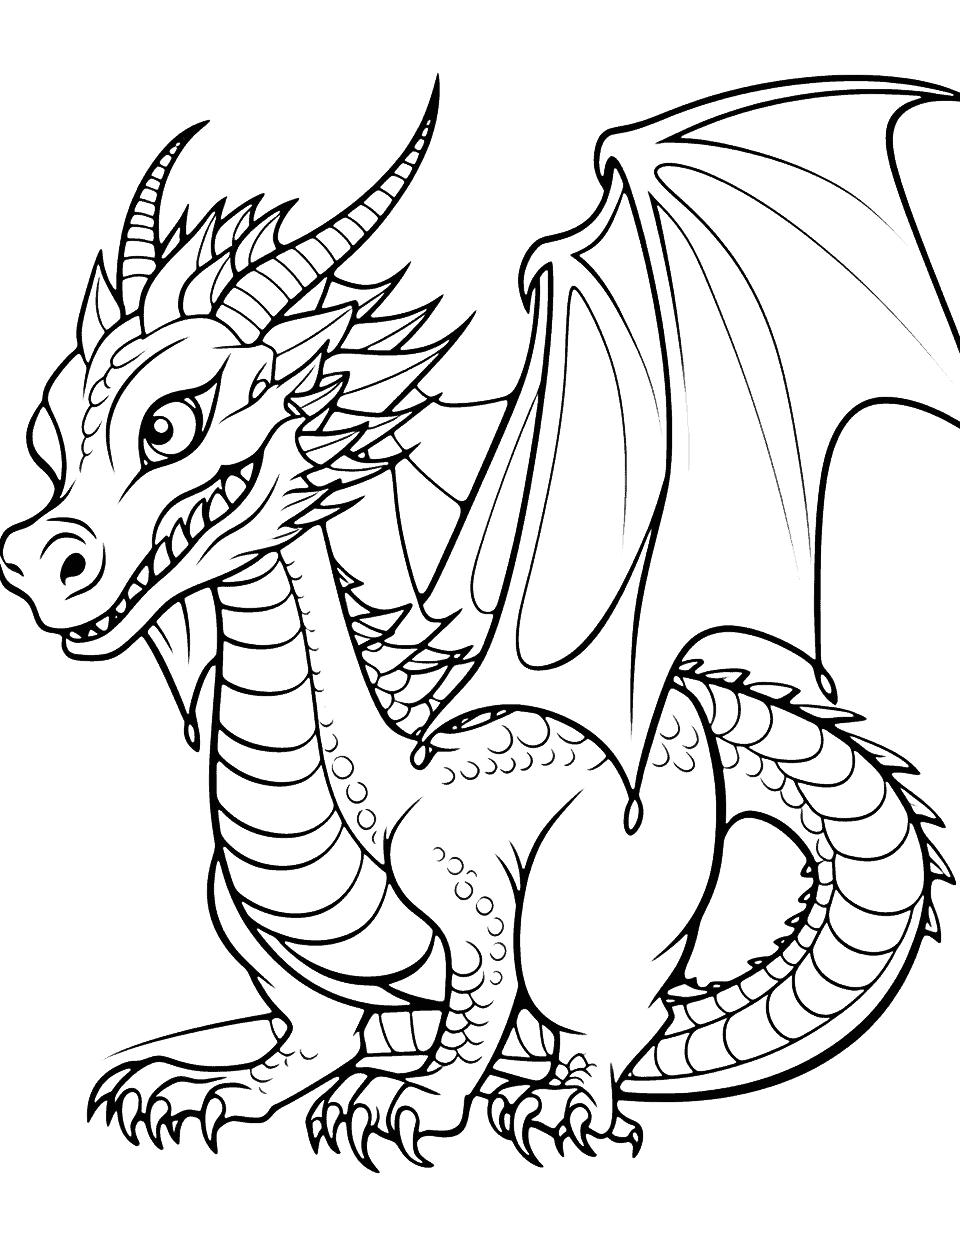 Fantasy Dragon Coloring Page - A fantasy-style dragon, with glowing eyes and shimmering scales.